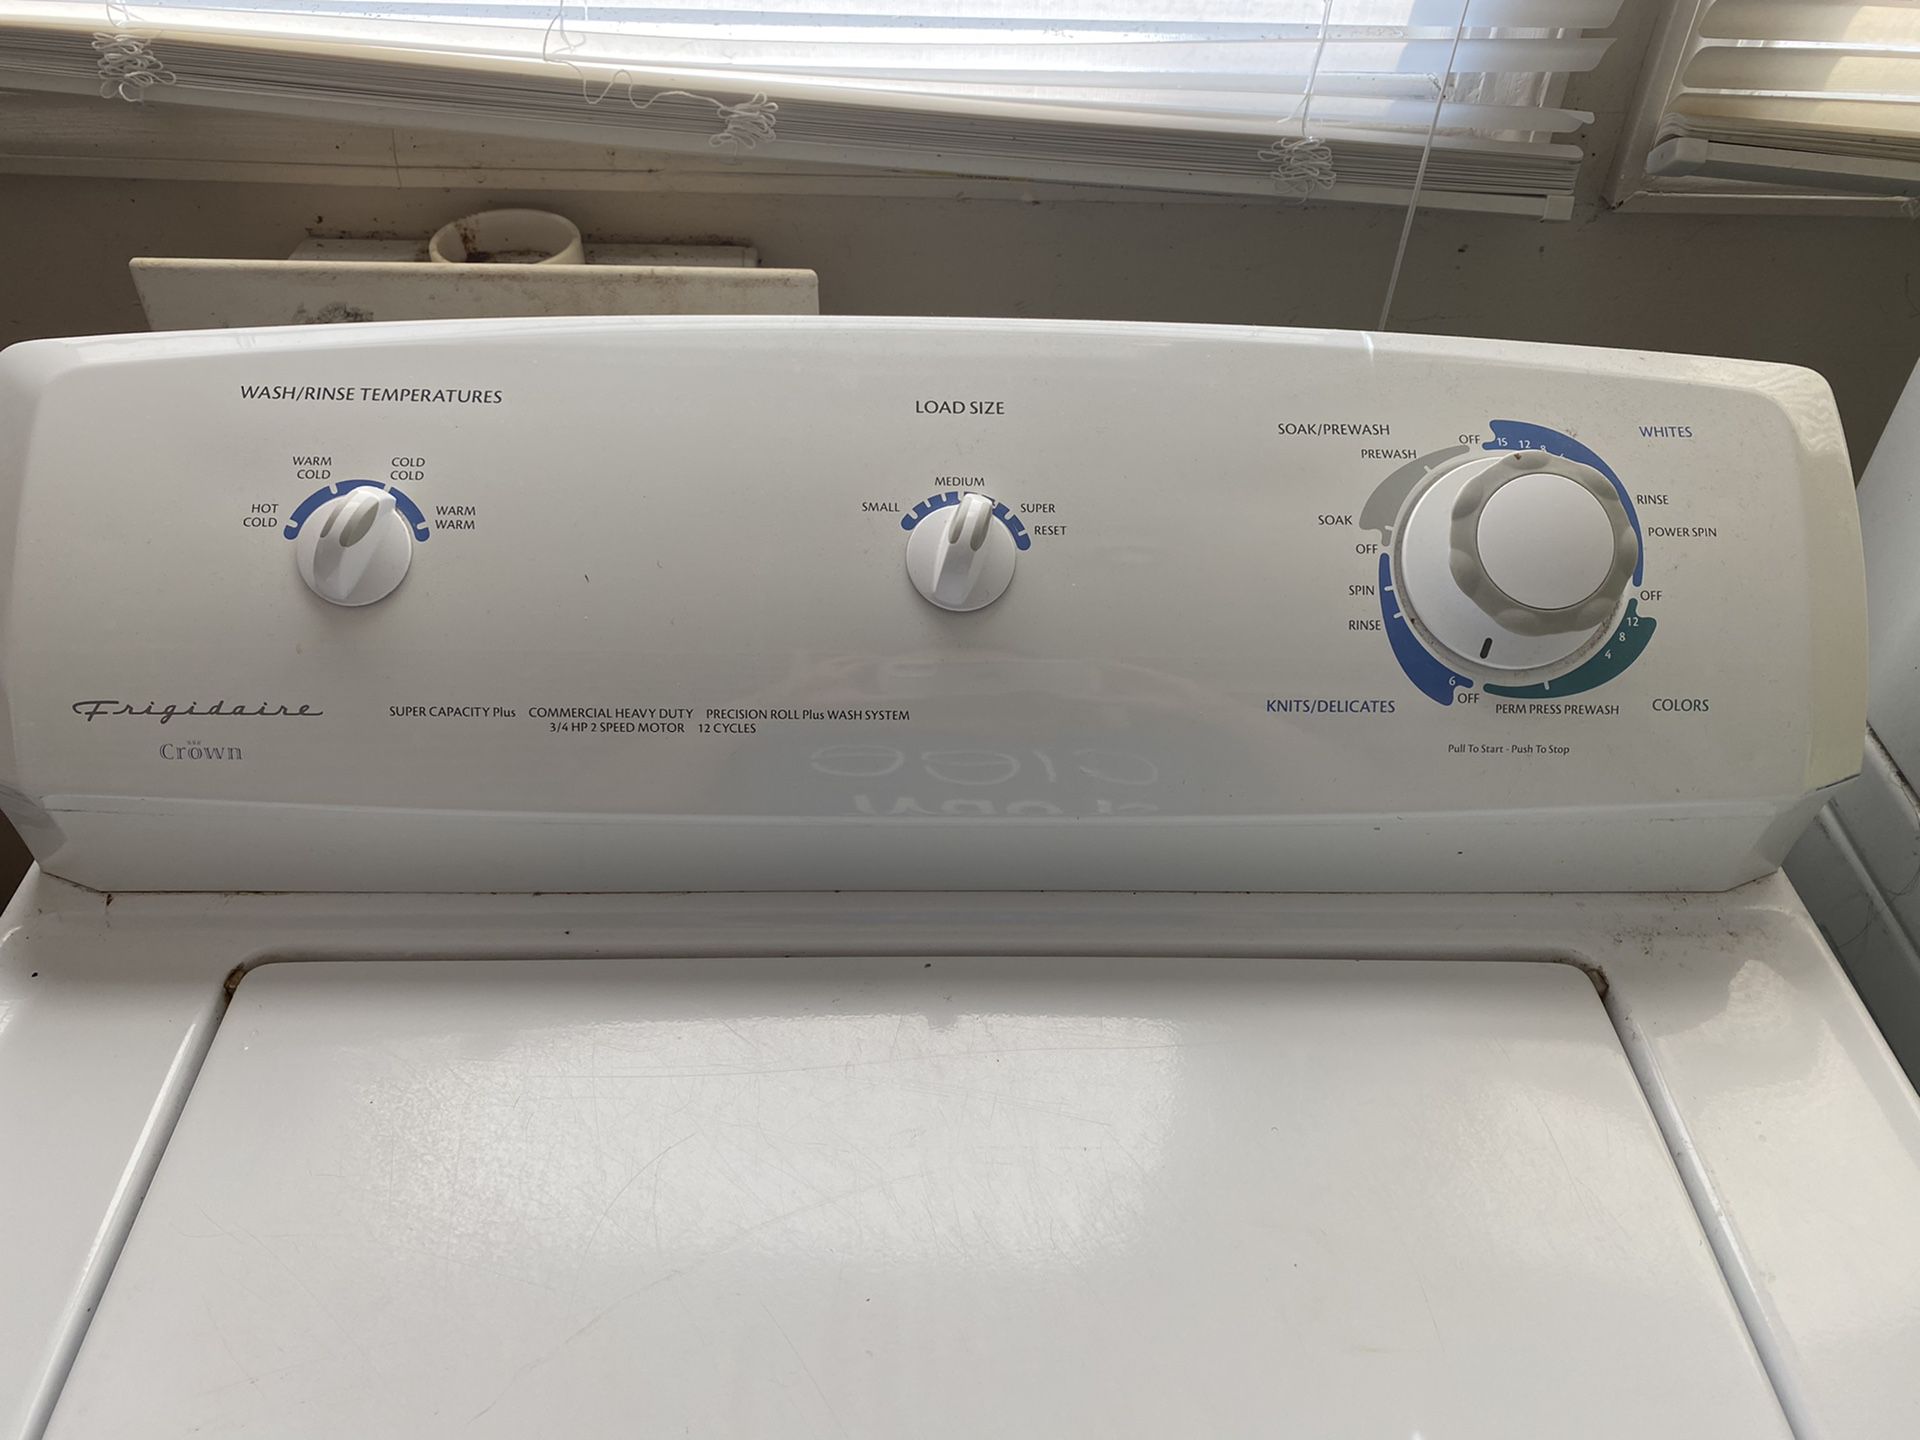 Crown washer obo